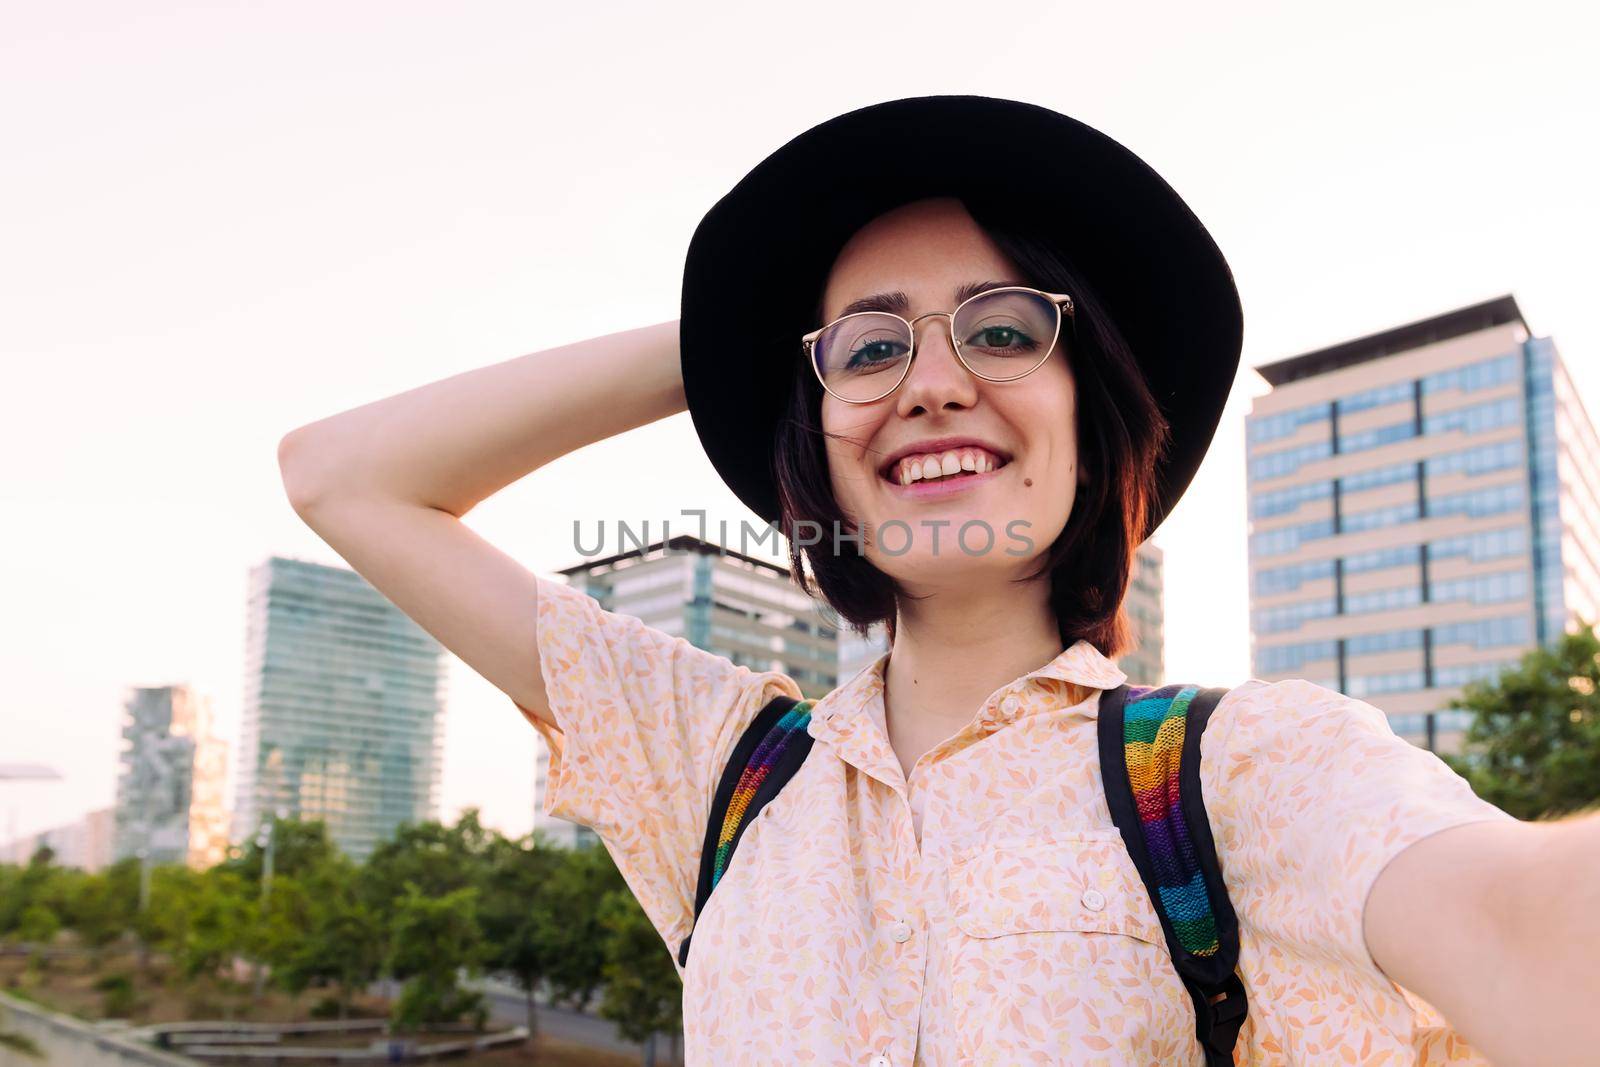 selfie photo of a beautiful young woman with glasses and hat smiling in front of the city, concept of social media and traveler lifestyle, copy space for text